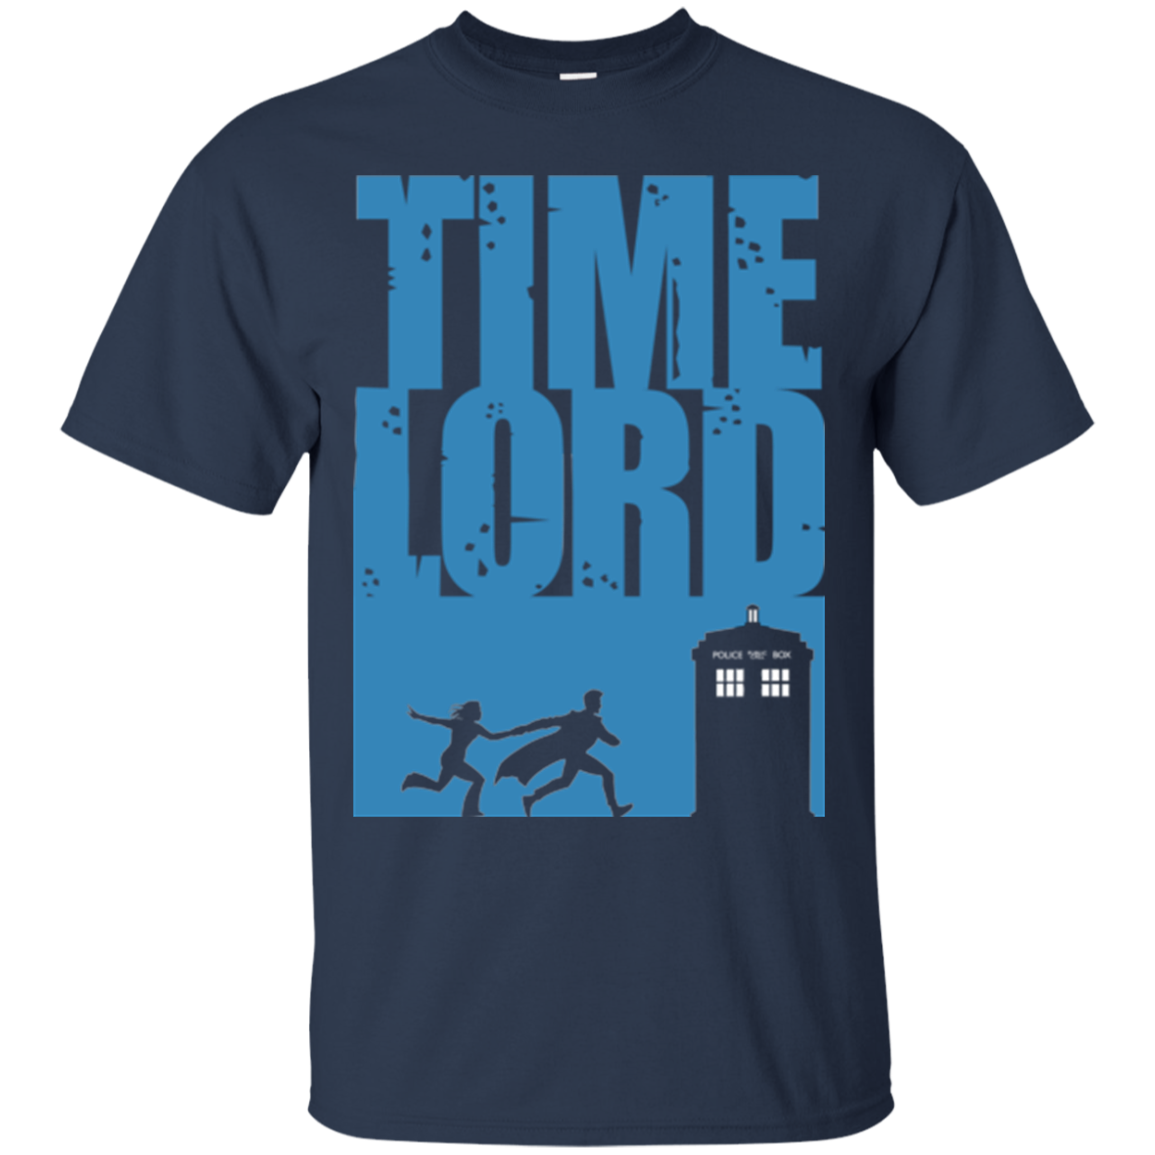 Time Lord Allons-y! T-Shirt